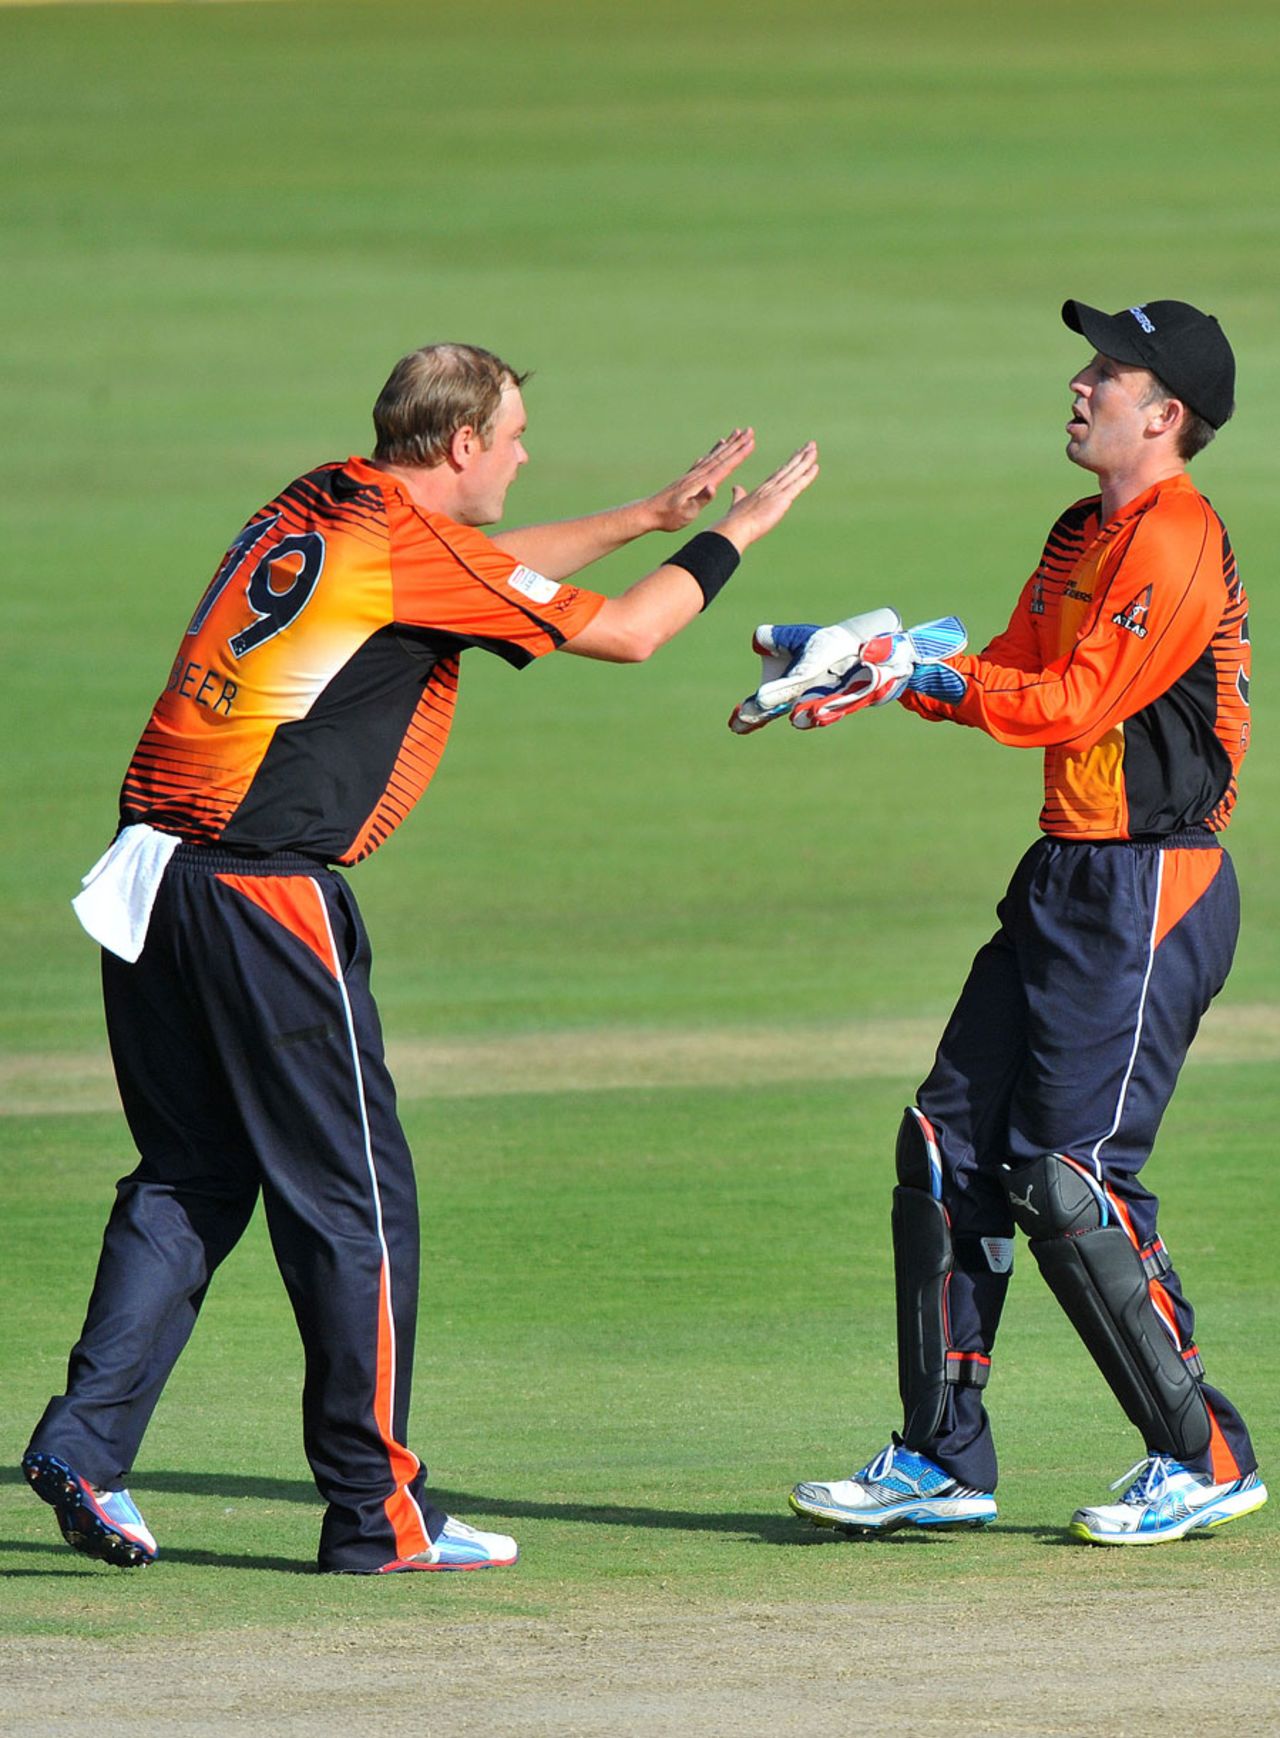 Michael Beer celebrates a wicket with Luke Ronchi, Auckland Aces v Perth Scorchers, Champions League T20, Centurion, October 23, 2012